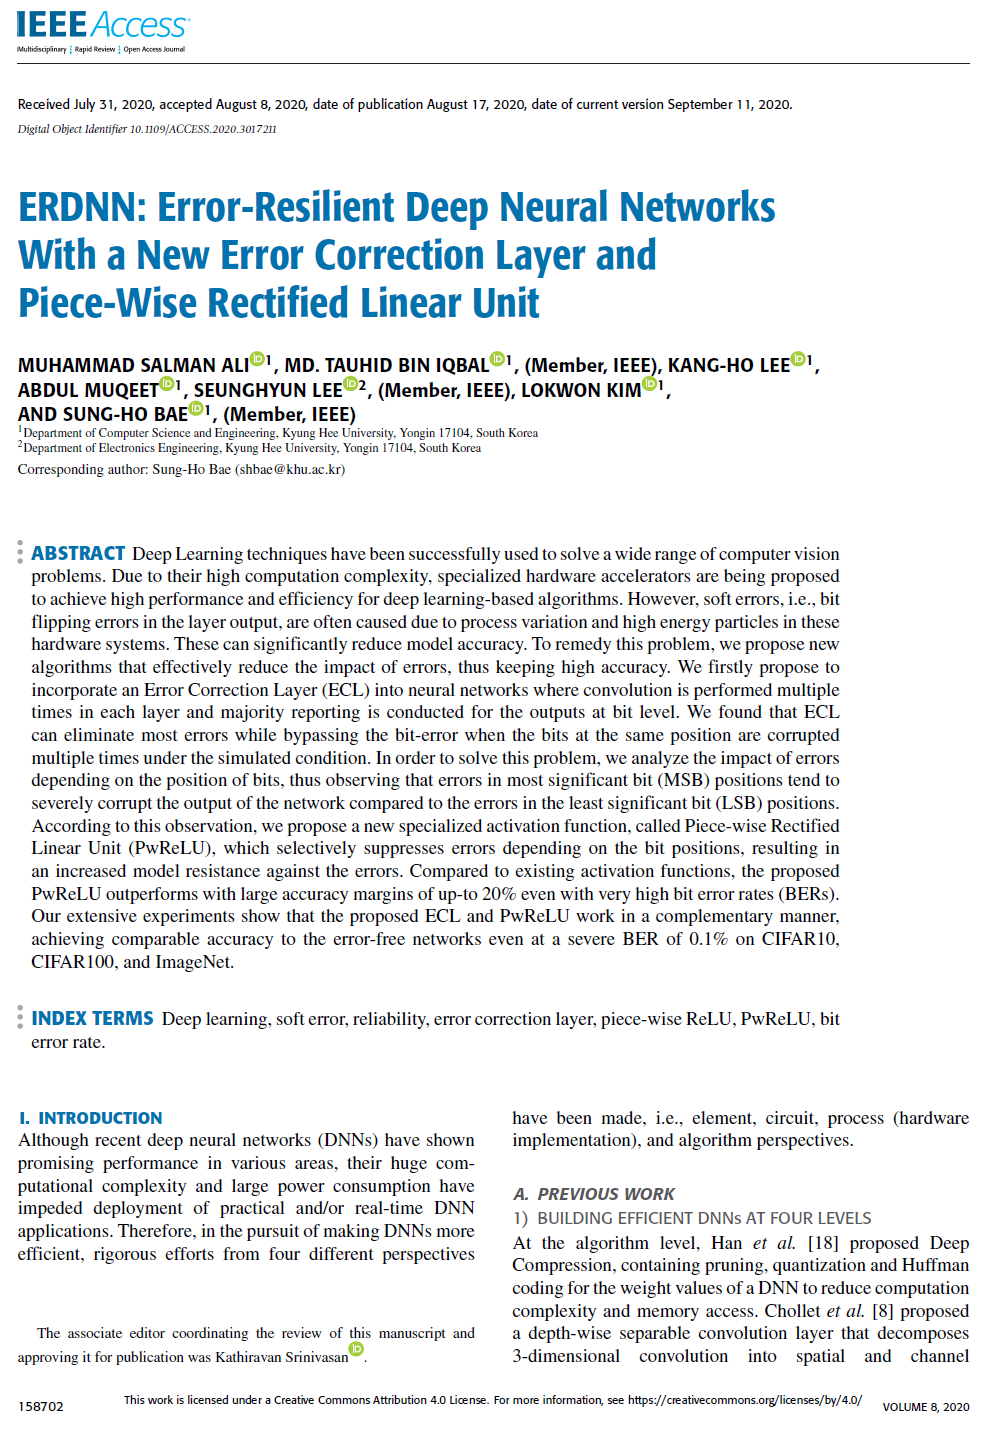 ERDNN: Error-Resilient Deep Neural Networks With a New Error Correction Layer and Piece-Wise Rectified Linear Unit